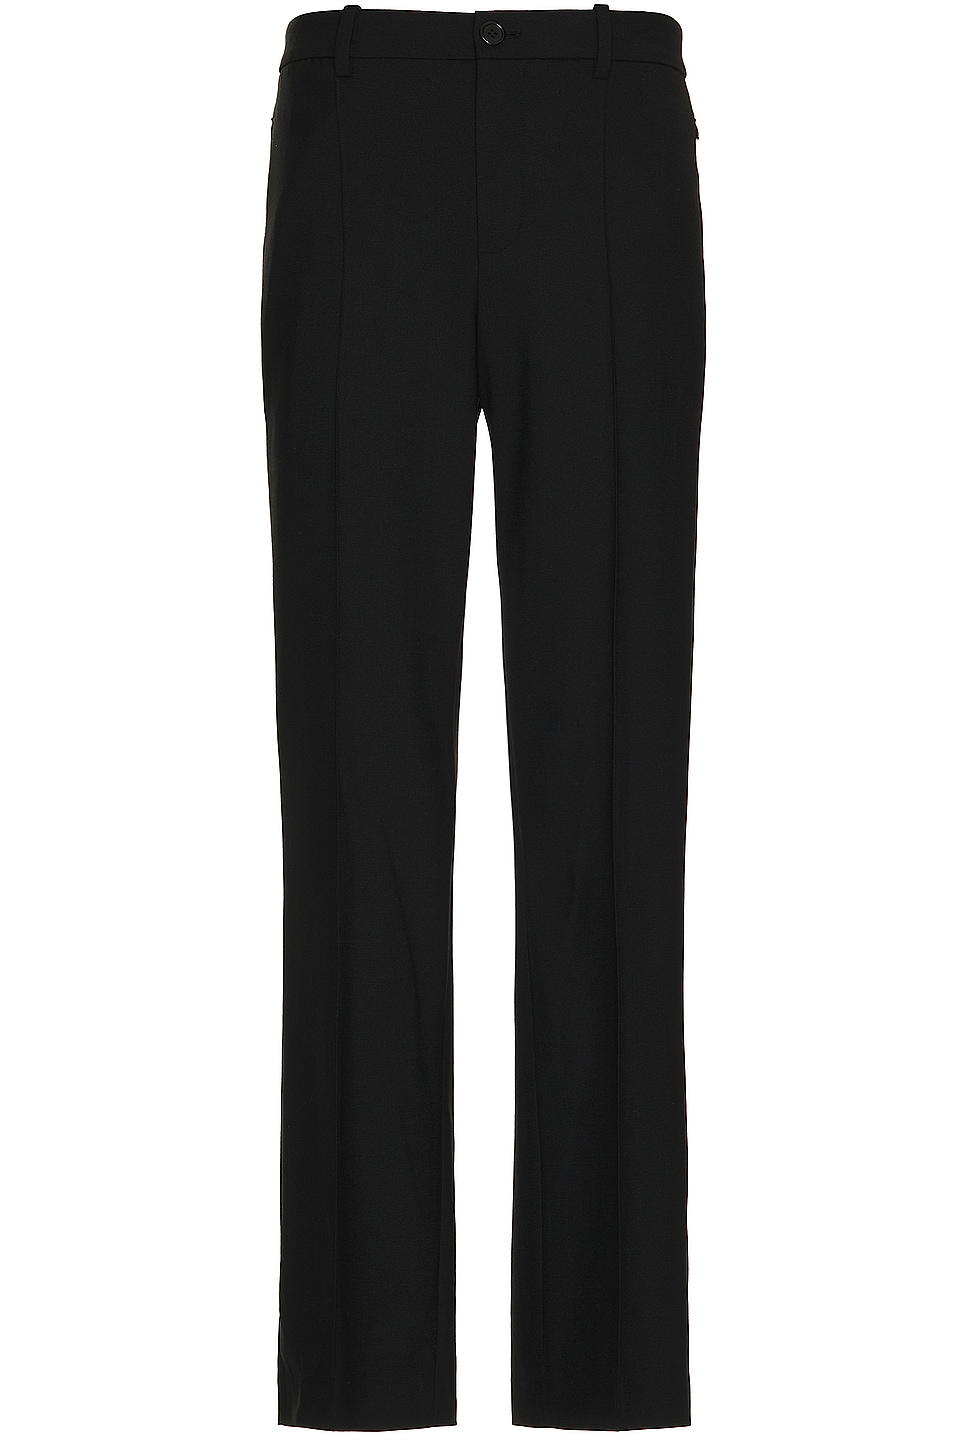 Image 1 of Helmut Lang Relaxed Trouser in Black